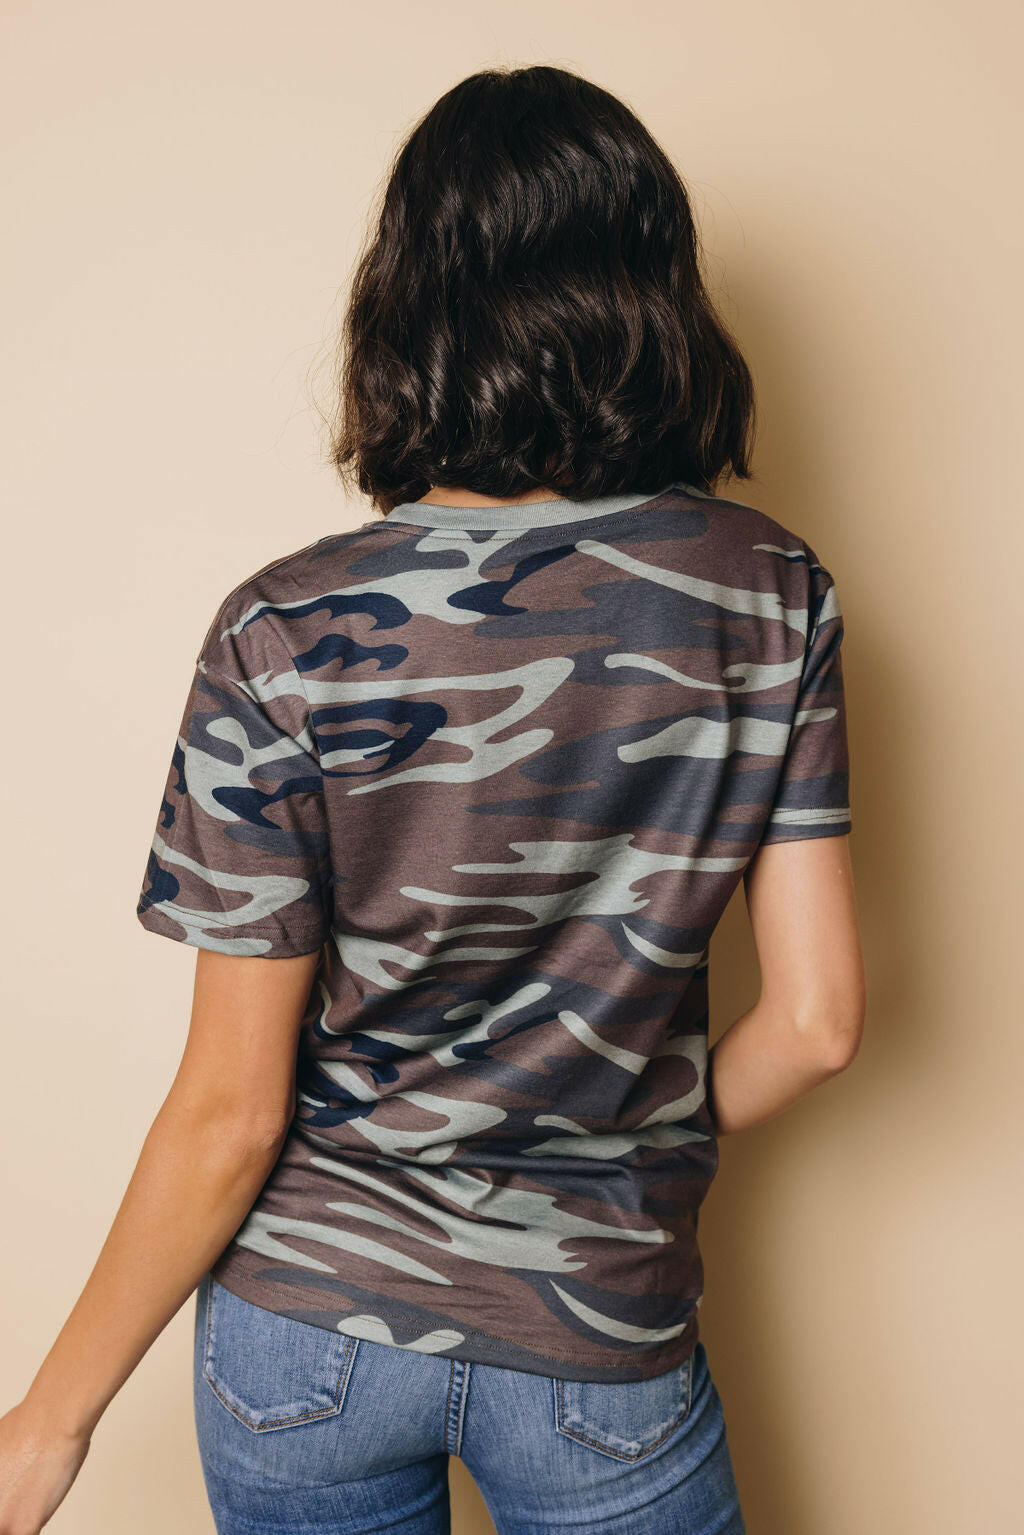 Coffee Graphic Camo Tee Stay Warm In Style